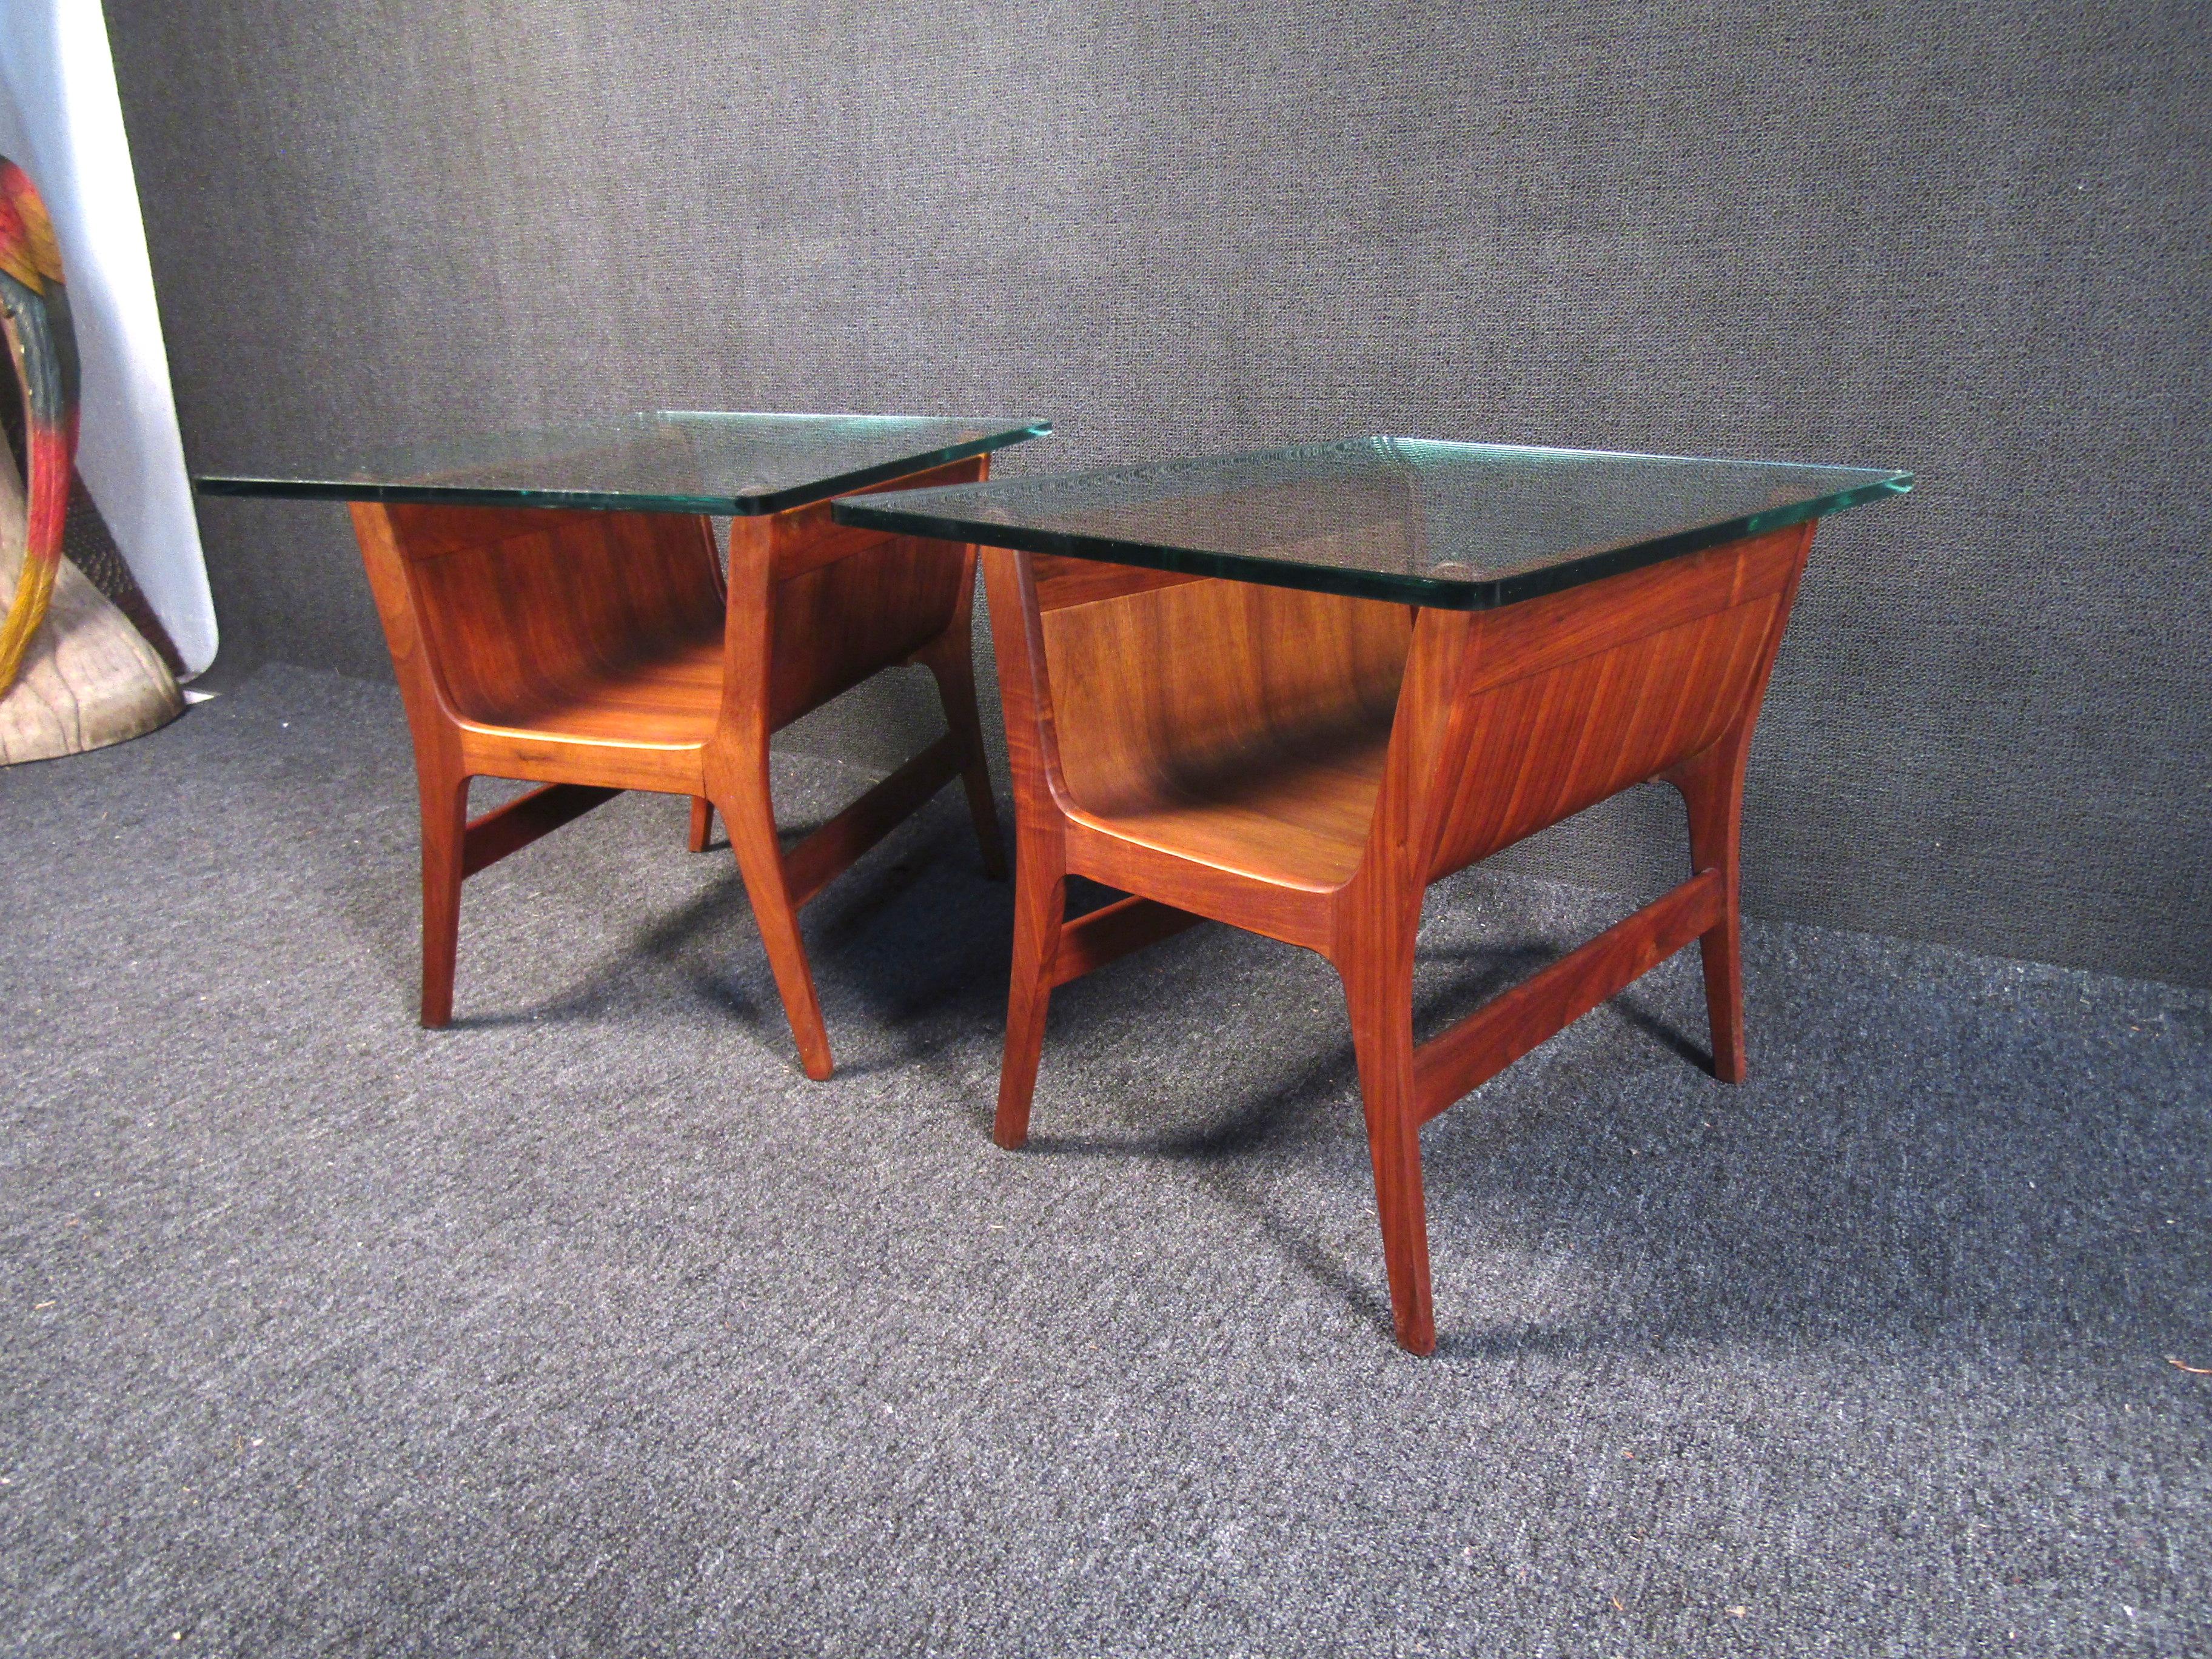 Beautiful Mid-Century Modern Sculptural Wood Side Tables with Glass Tops In Good Condition For Sale In Brooklyn, NY